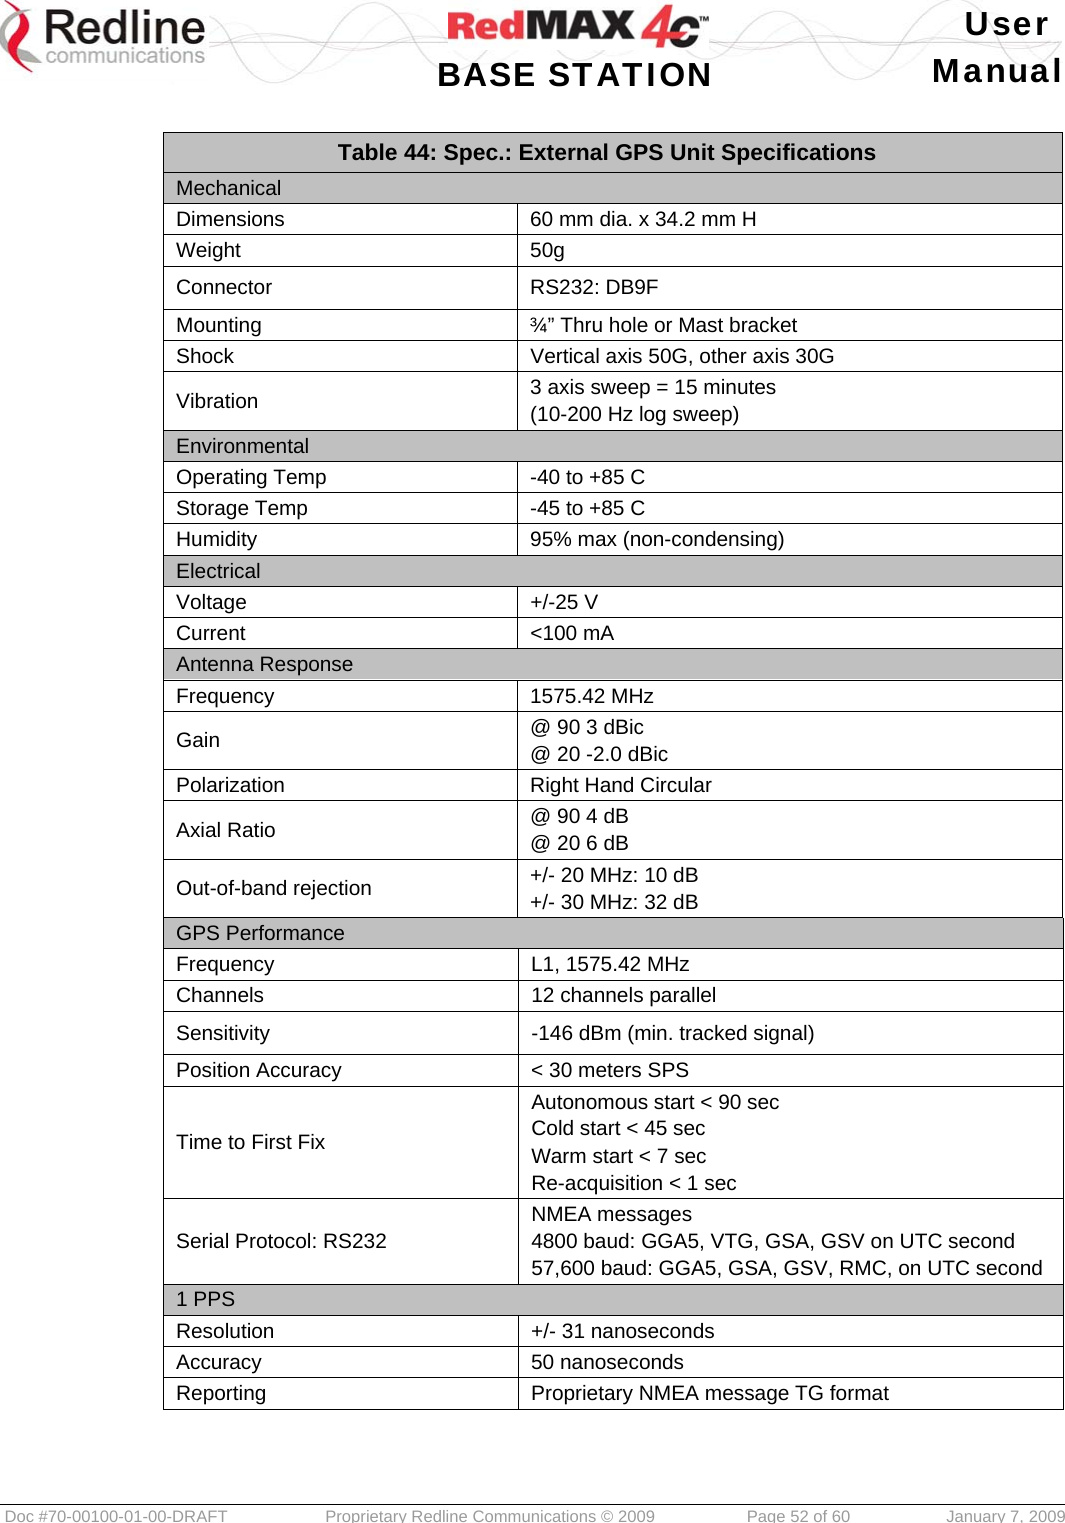   User  BASE STATION Manual  Doc #70-00100-01-00-DRAFT  Proprietary Redline Communications © 2009   Page 52 of 60  January 7, 2009  Table 44: Spec.: External GPS Unit Specifications Mechanical Dimensions  60 mm dia. x 34.2 mm H Weight 50g Connector RS232: DB9F Mounting  ¾” Thru hole or Mast bracket Shock  Vertical axis 50G, other axis 30G Vibration  3 axis sweep = 15 minutes (10-200 Hz log sweep) Environmental Operating Temp  -40 to +85 C Storage Temp  -45 to +85 C Humidity  95% max (non-condensing) Electrical Voltage +/-25 V Current &lt;100 mA Antenna Response Frequency 1575.42 MHz Gain  @ 90 3 dBic @ 20 -2.0 dBic Polarization Right Hand Circular Axial Ratio  @ 90 4 dB @ 20 6 dB Out-of-band rejection  +/- 20 MHz: 10 dB +/- 30 MHz: 32 dB GPS Performance Frequency  L1, 1575.42 MHz Channels 12 channels parallel Sensitivity  -146 dBm (min. tracked signal) Position Accuracy  &lt; 30 meters SPS Time to First Fix Autonomous start &lt; 90 sec Cold start &lt; 45 sec Warm start &lt; 7 sec Re-acquisition &lt; 1 sec Serial Protocol: RS232 NMEA messages 4800 baud: GGA5, VTG, GSA, GSV on UTC second 57,600 baud: GGA5, GSA, GSV, RMC, on UTC second 1 PPS Resolution  +/- 31 nanoseconds Accuracy 50 nanoseconds Reporting  Proprietary NMEA message TG format  